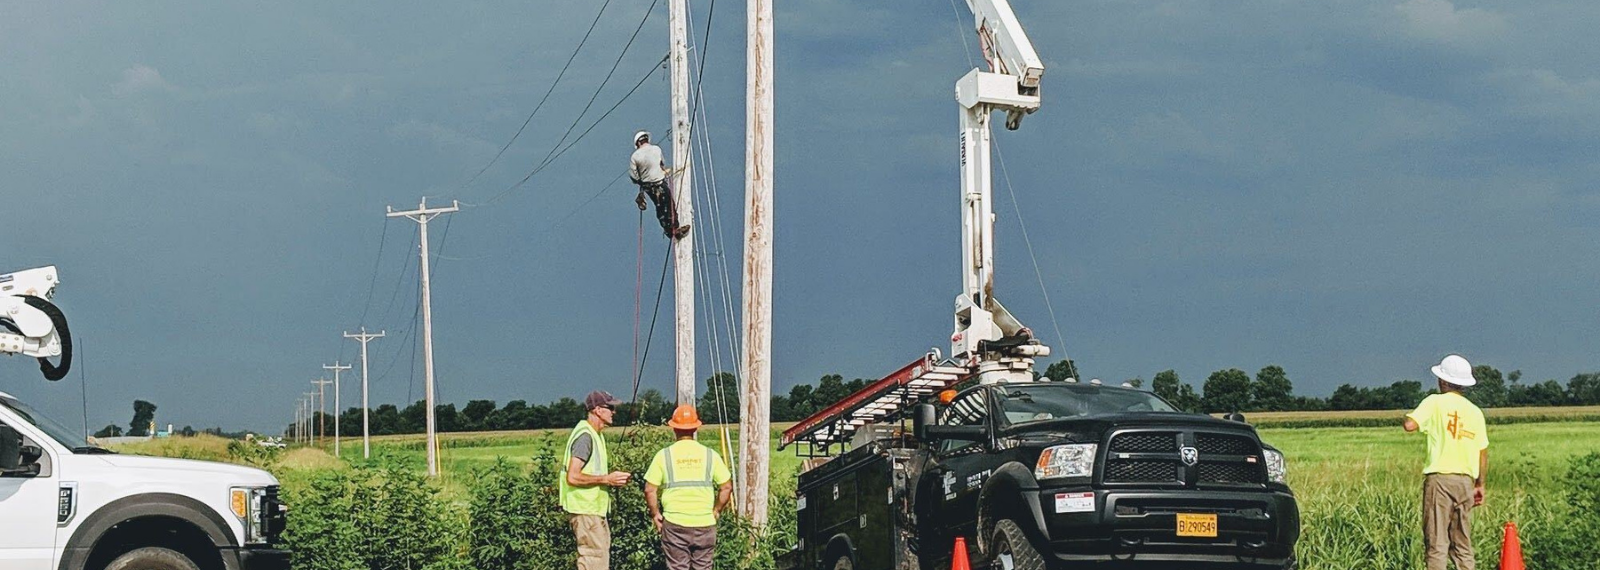 Craighead Electric Cooperative sets new benchmark for gigabit-fiber network delivery